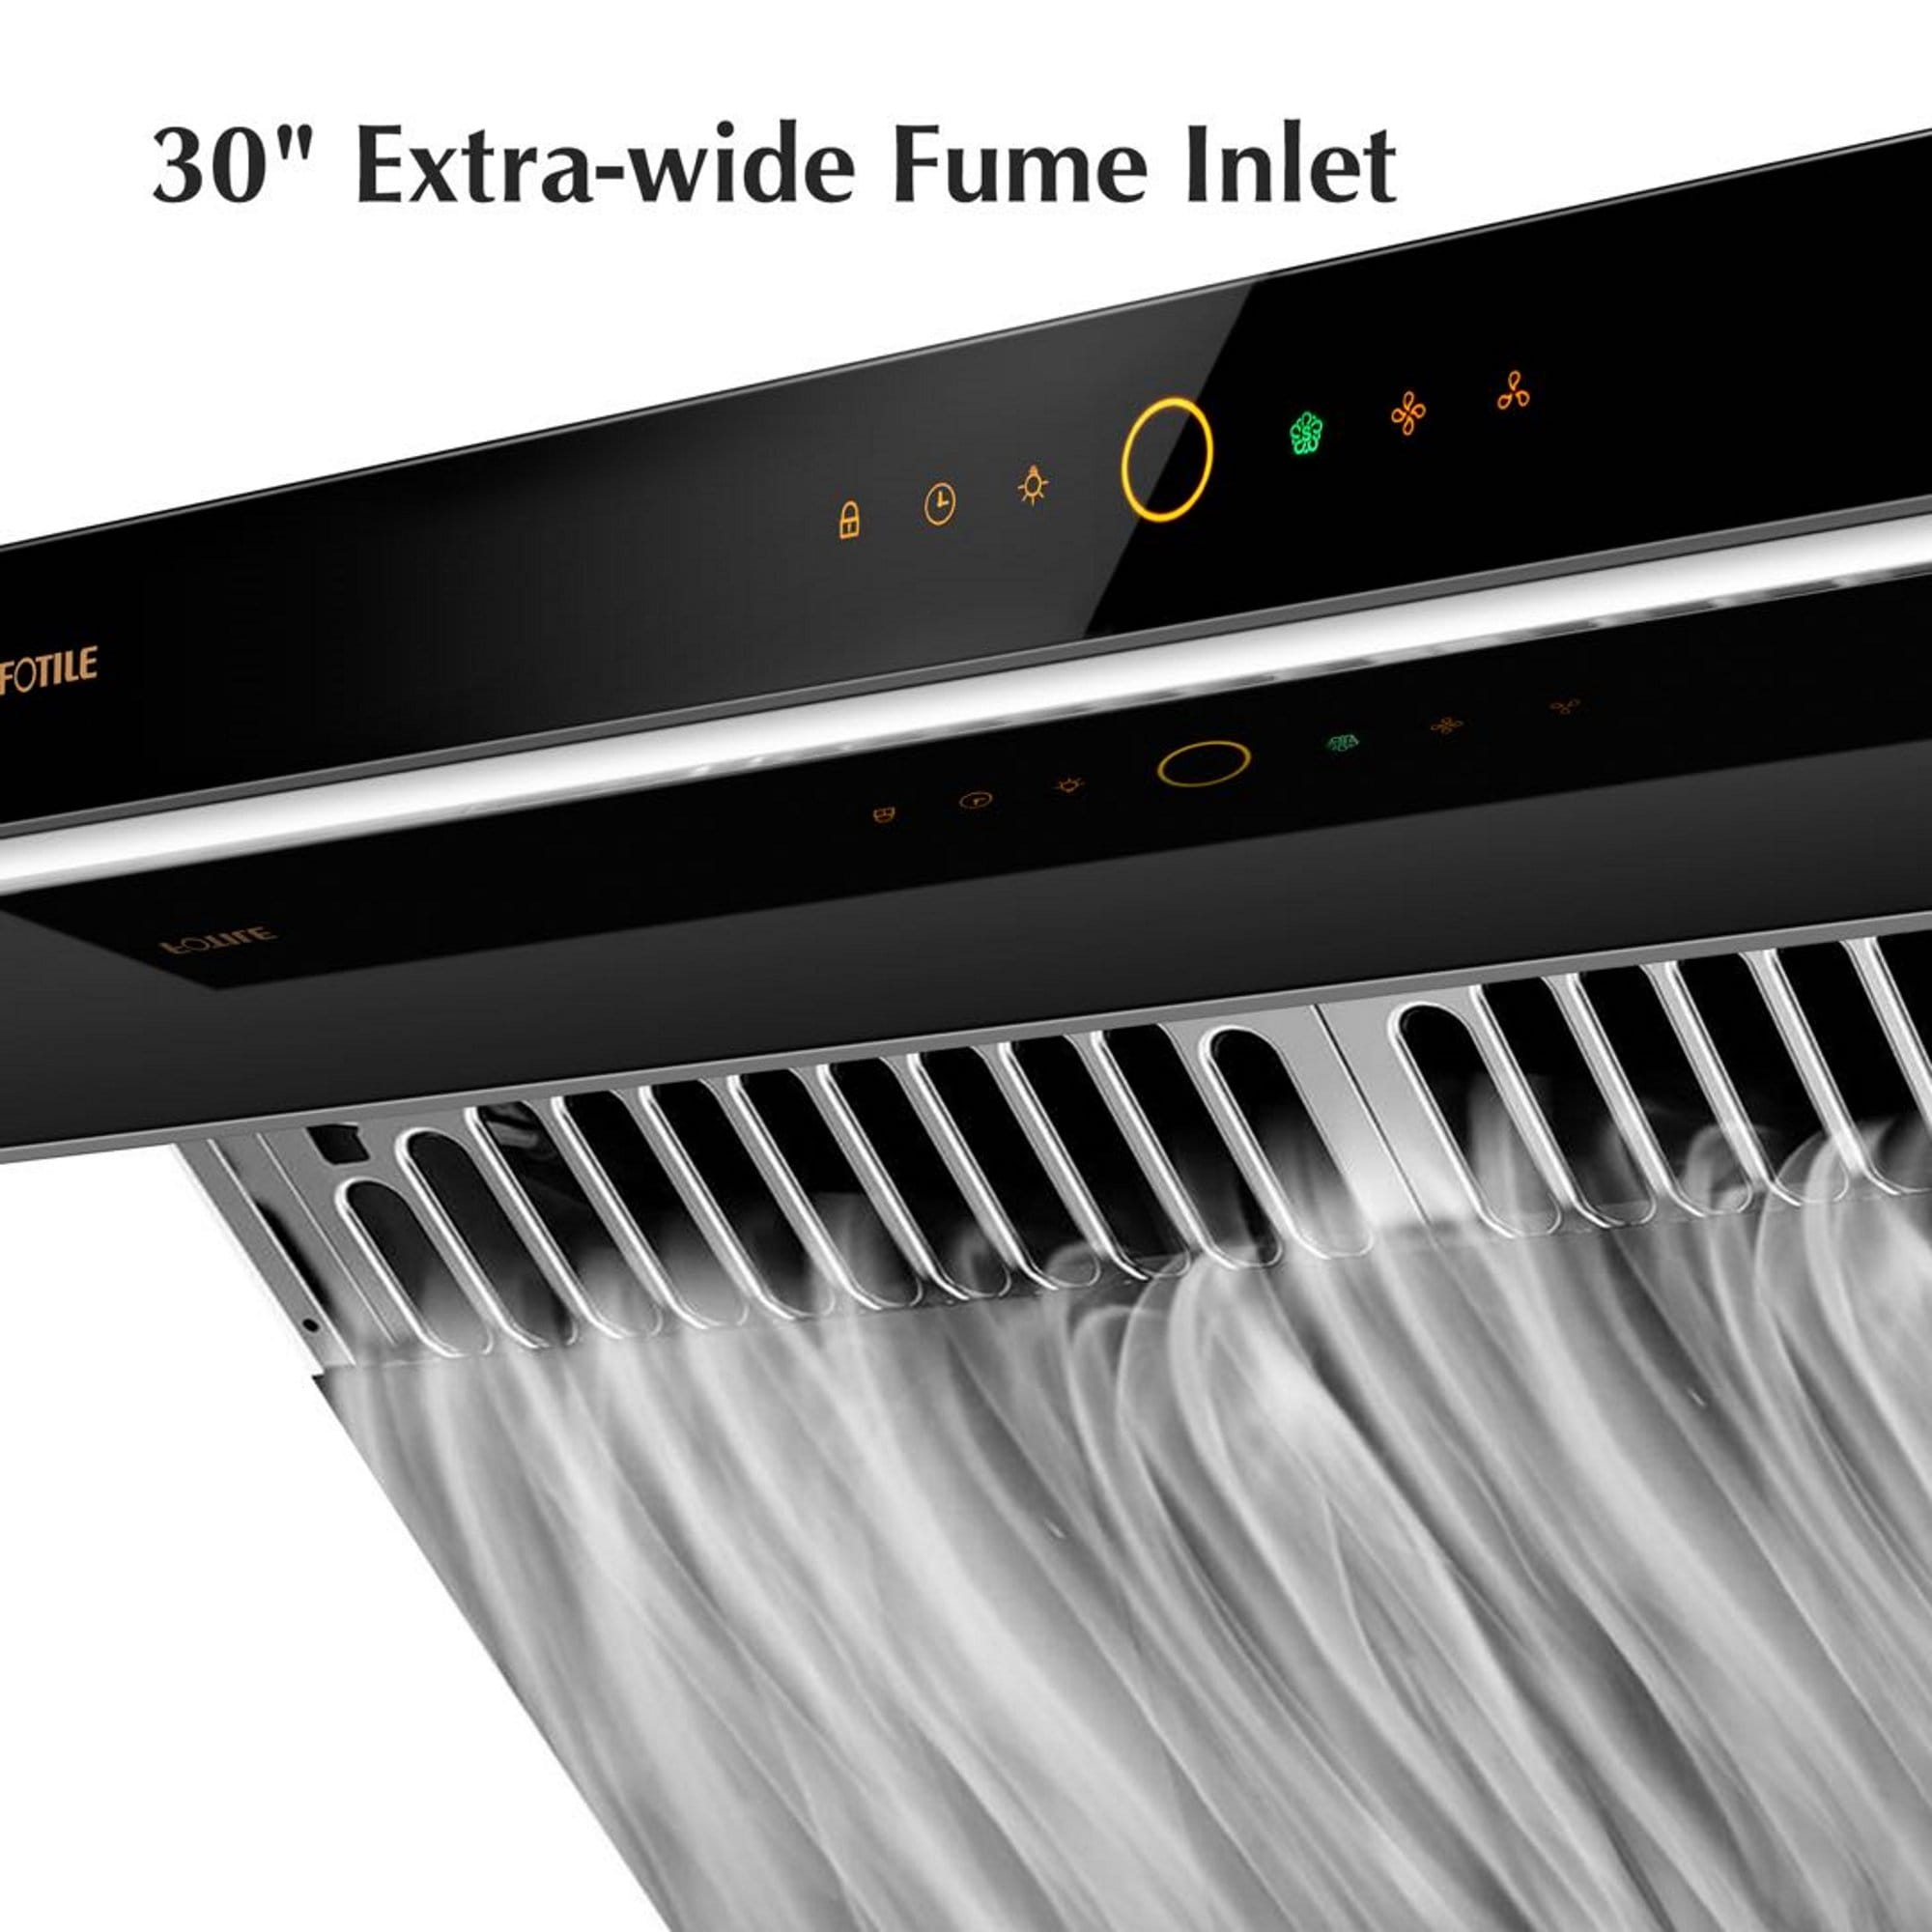 30-inch extra-wide fume inlet on the FOTILE JQG7505 Range Hood